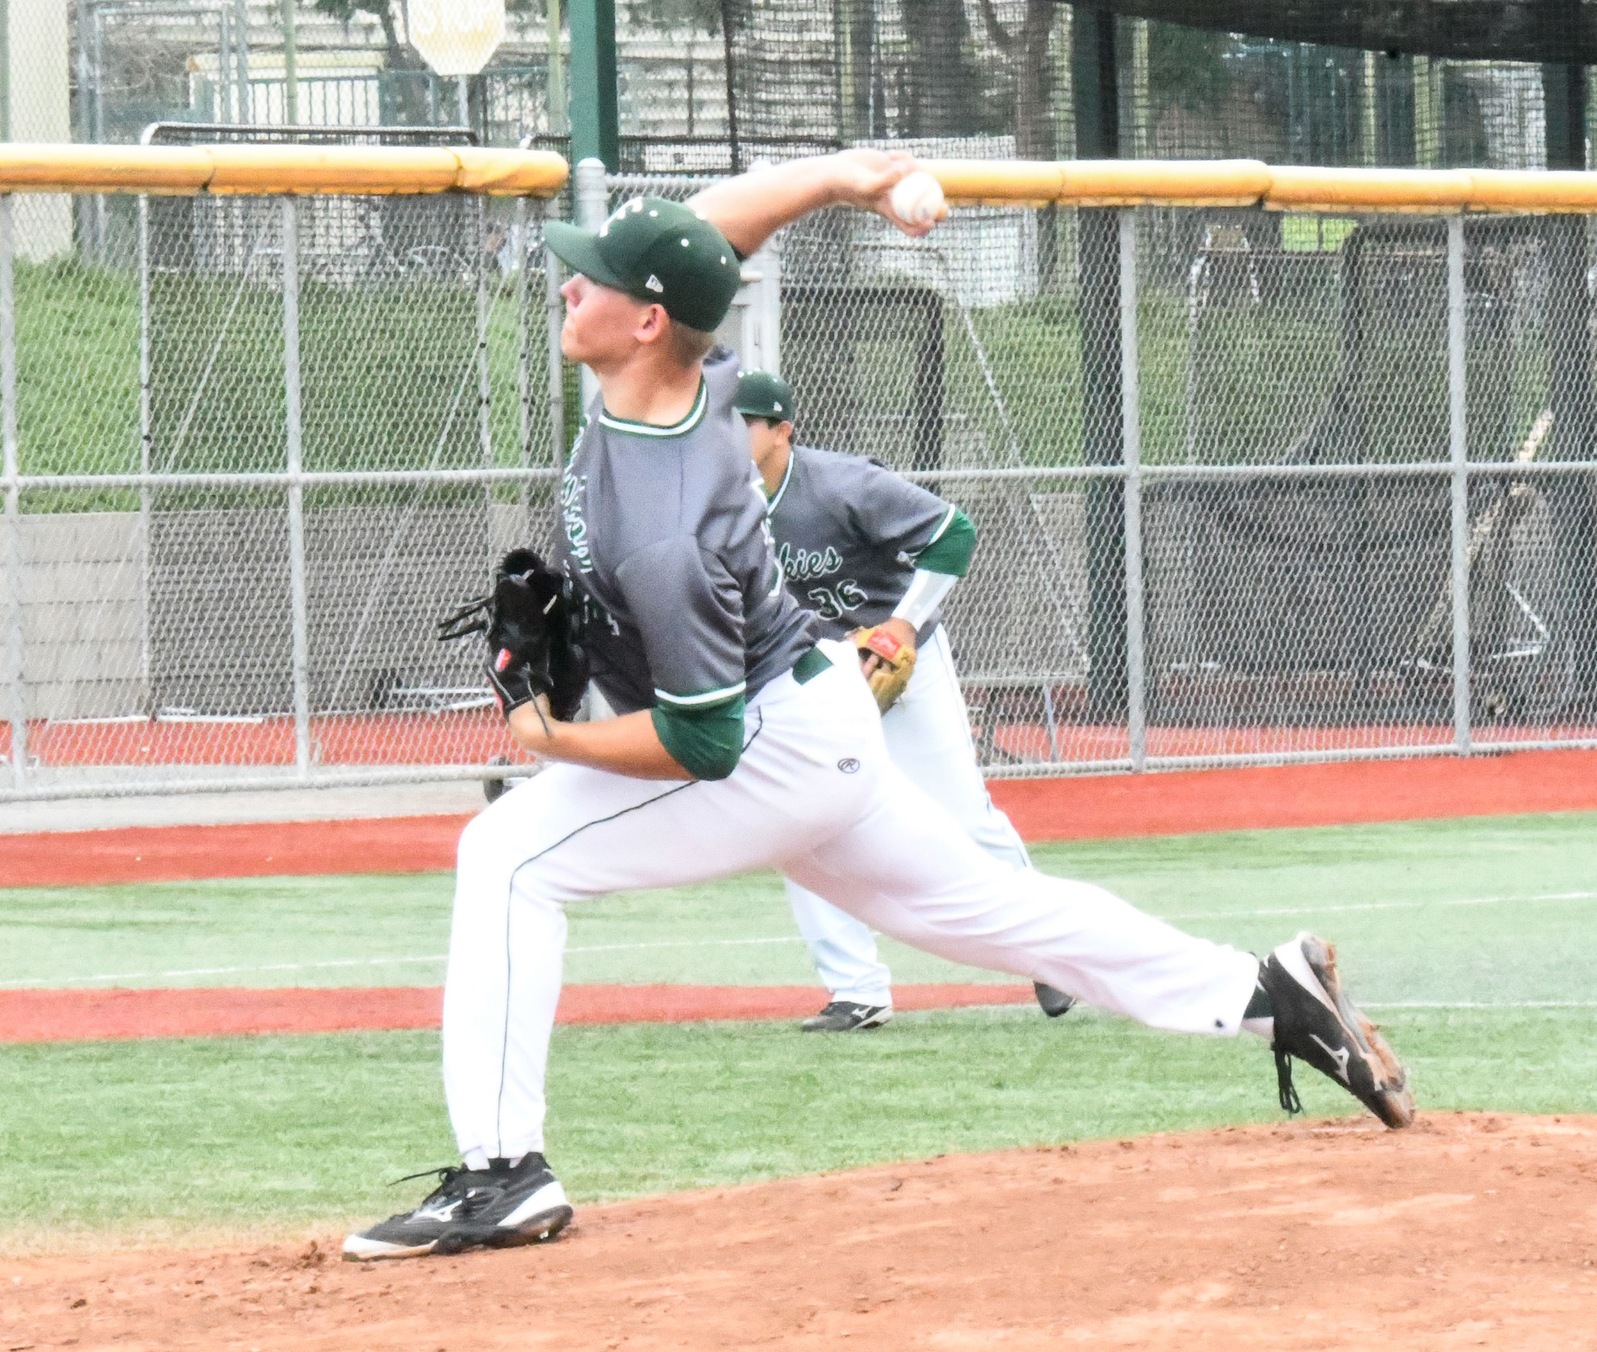 The East Los Angeles College baseball team defeated Compton College 11-1 and pitcher Paul Kosanovich (2-2) got the win. His 2.31 ERA ranks him at No. 41 in the state from over 400 pitchers. (photo by DeeDee Jackson)